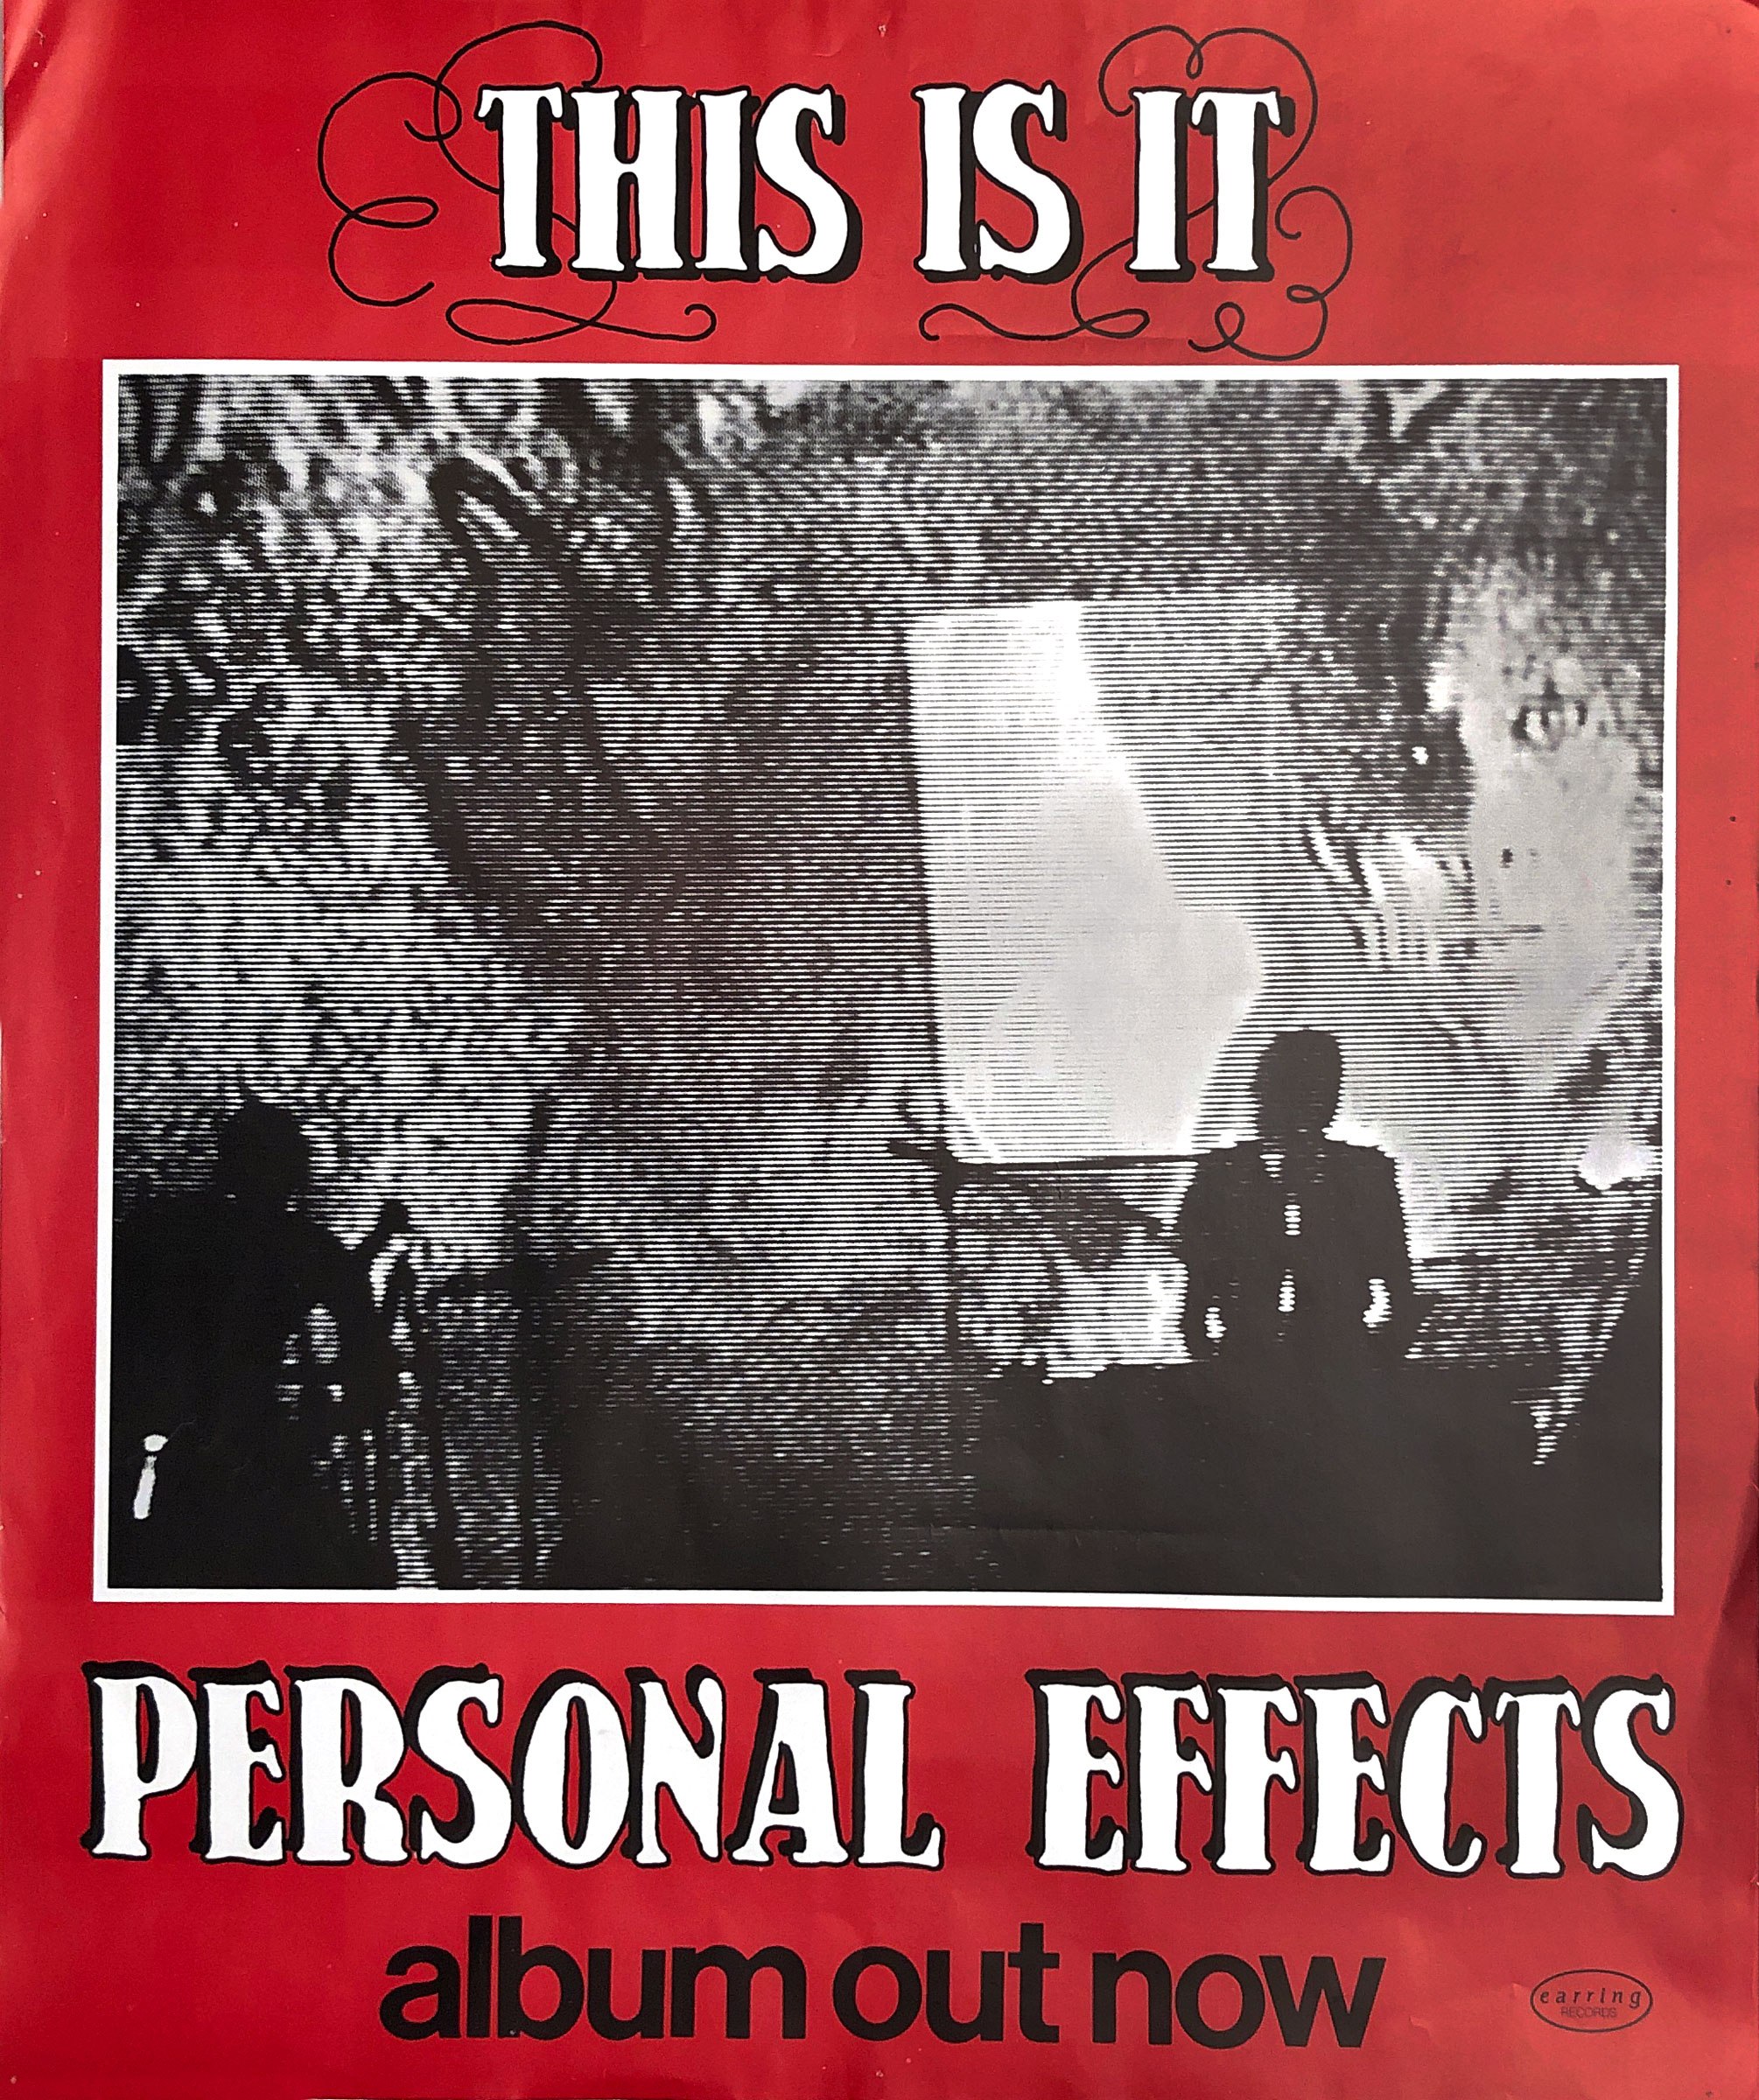 Promotional poster for Personal Effects LP "This Is It" on Earring Records